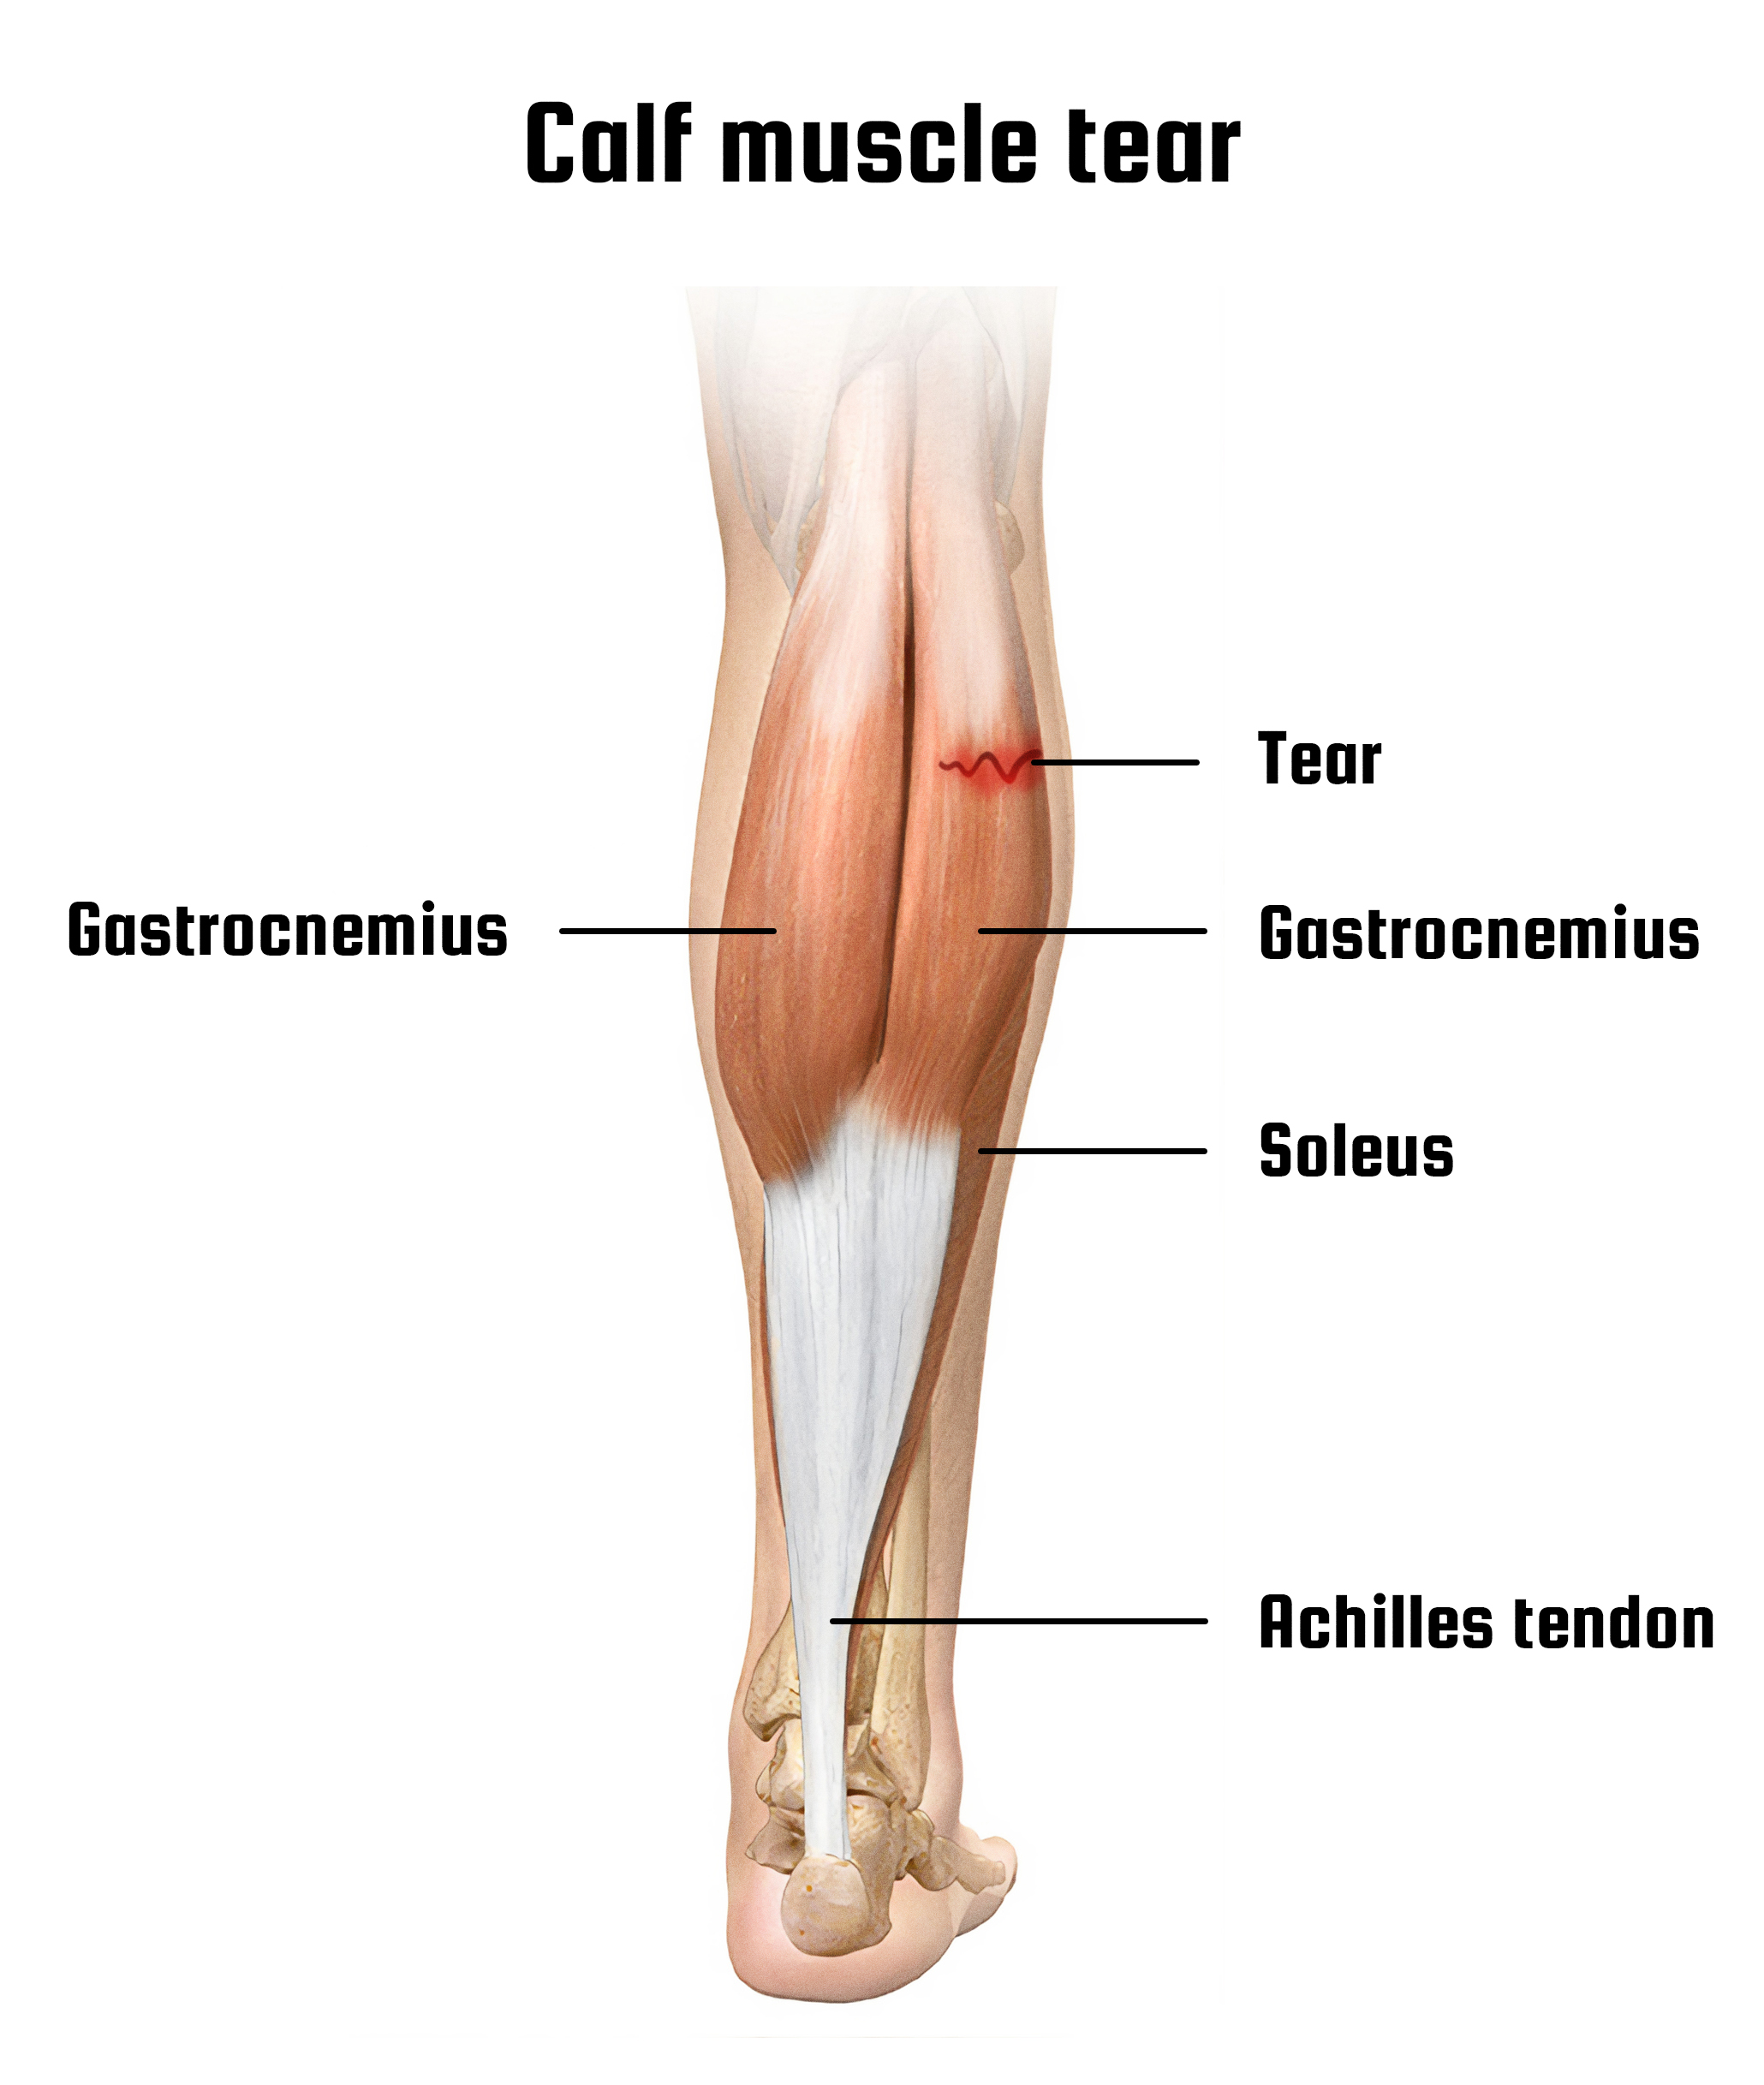 Pulled calf muscle: Treatment, symptoms, recovery, and exercises